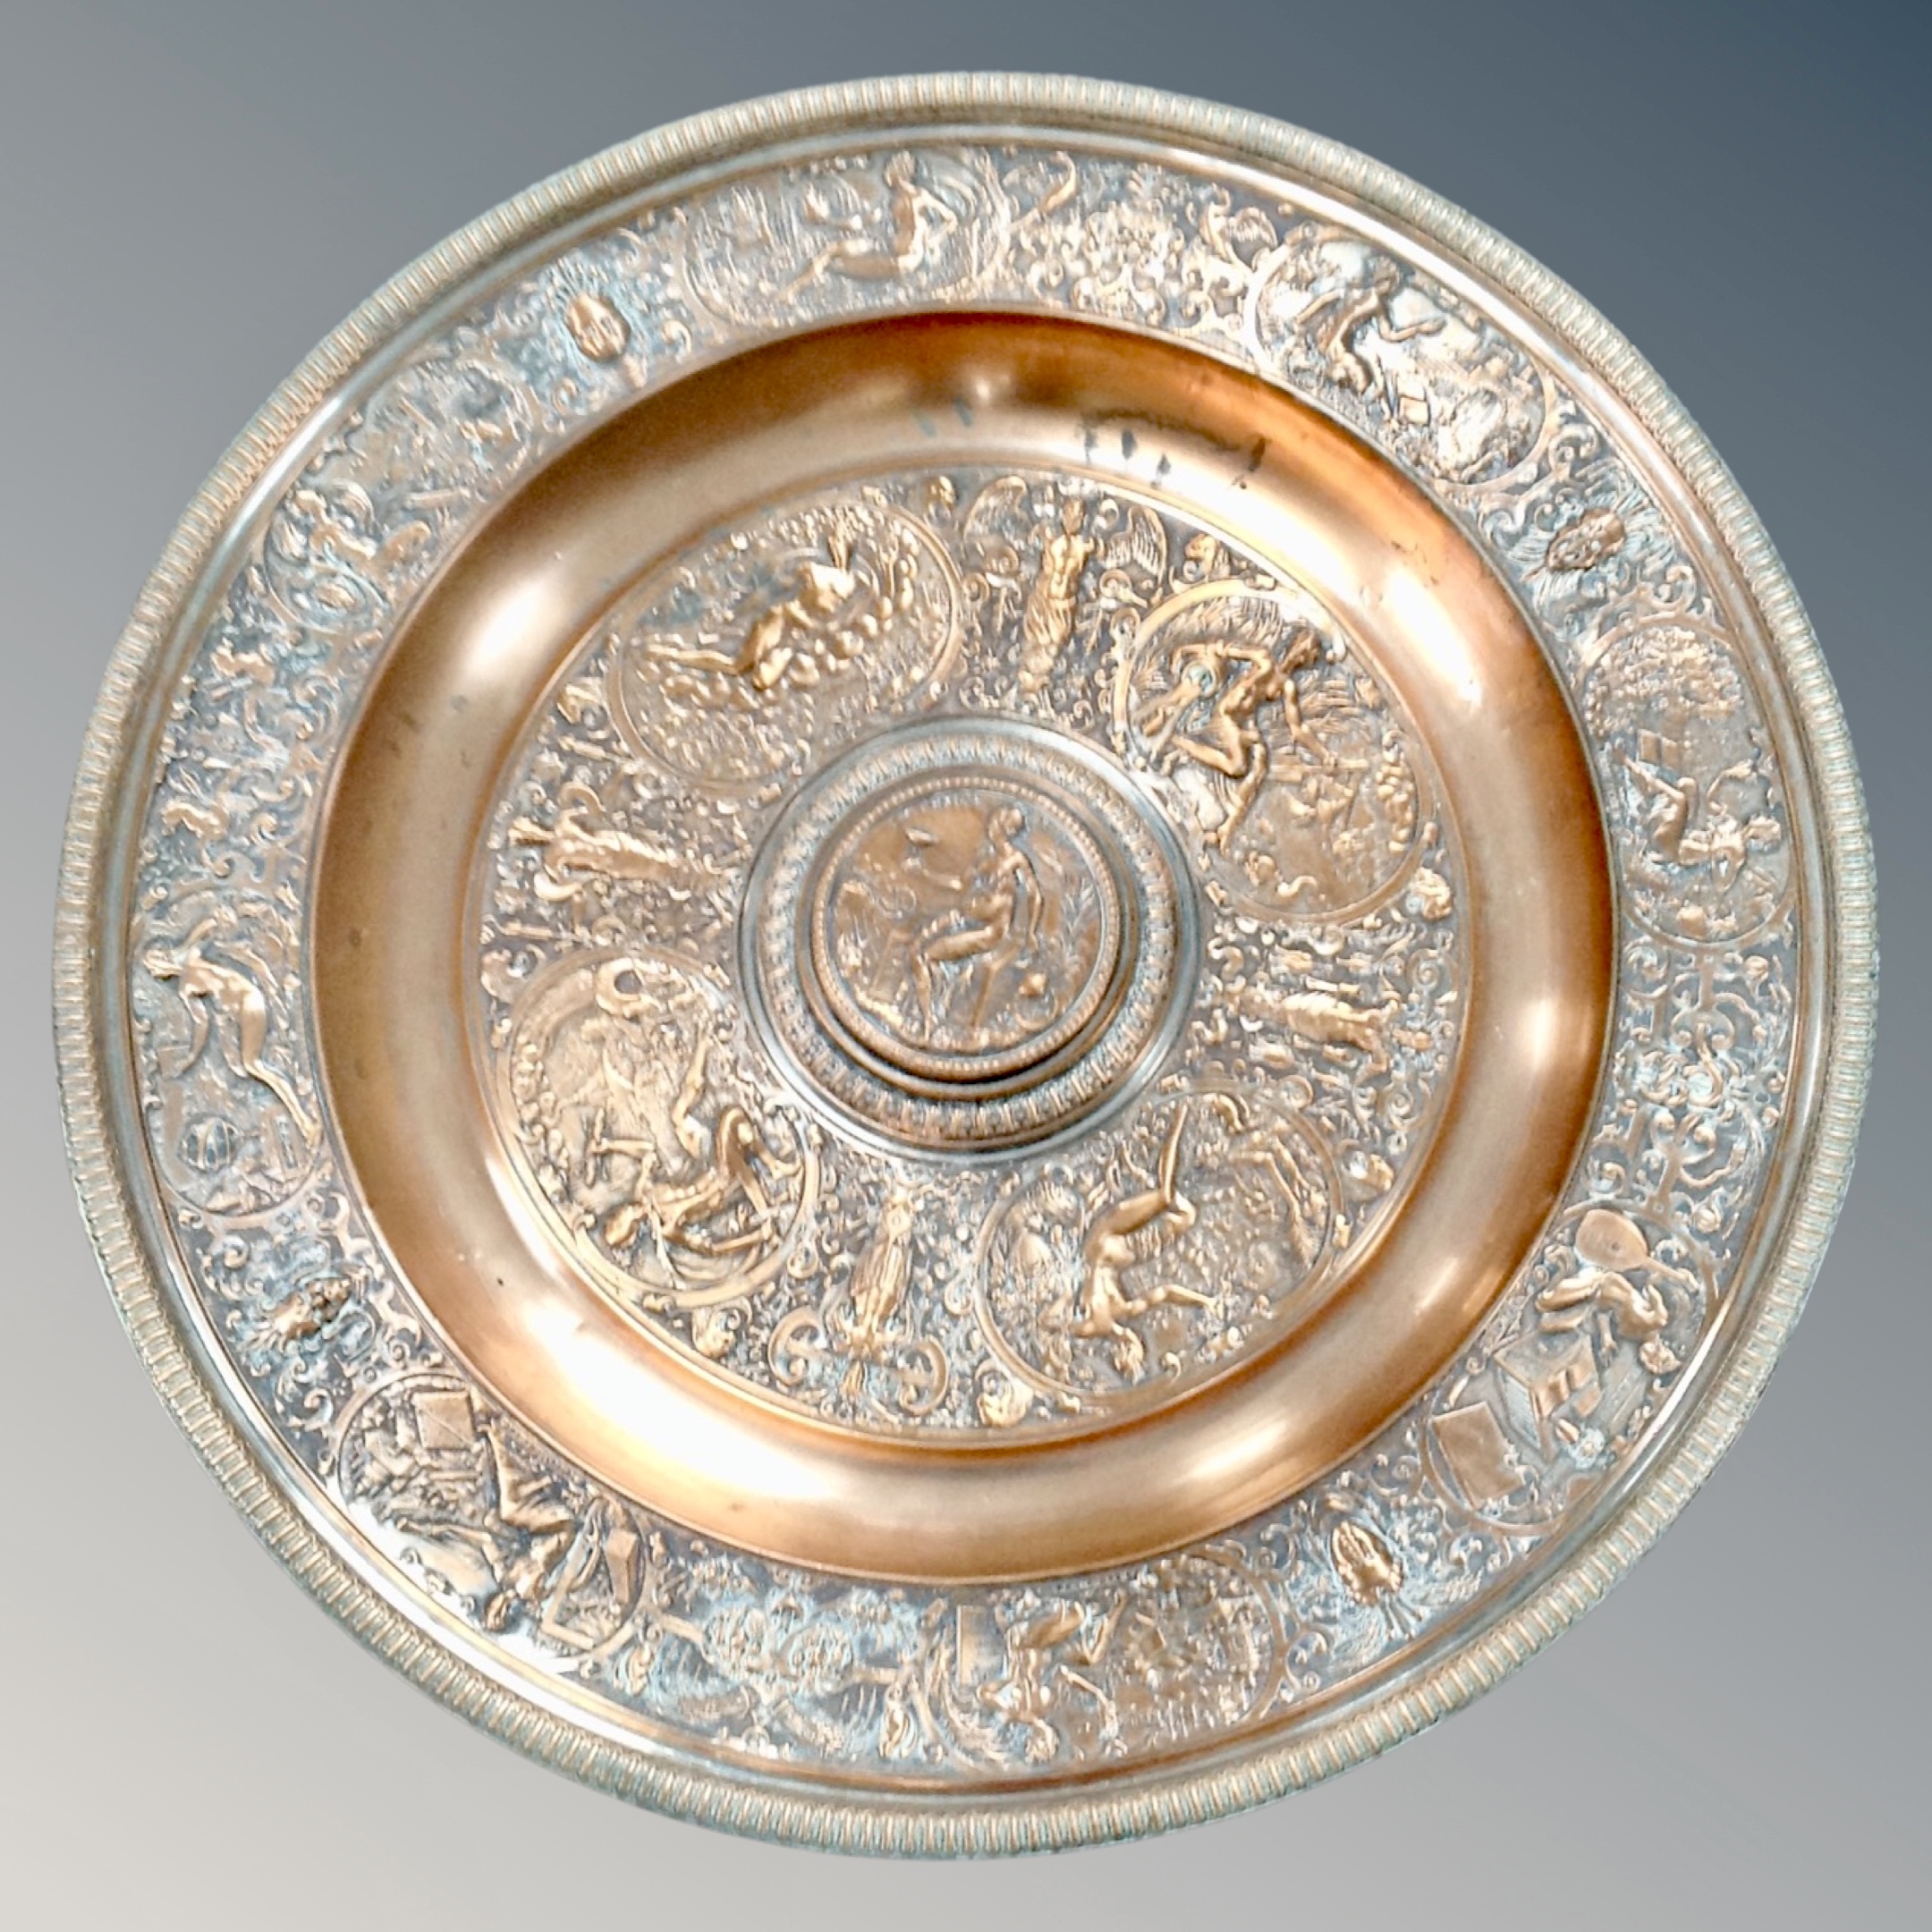 An ornate copper plate on pewter charger,